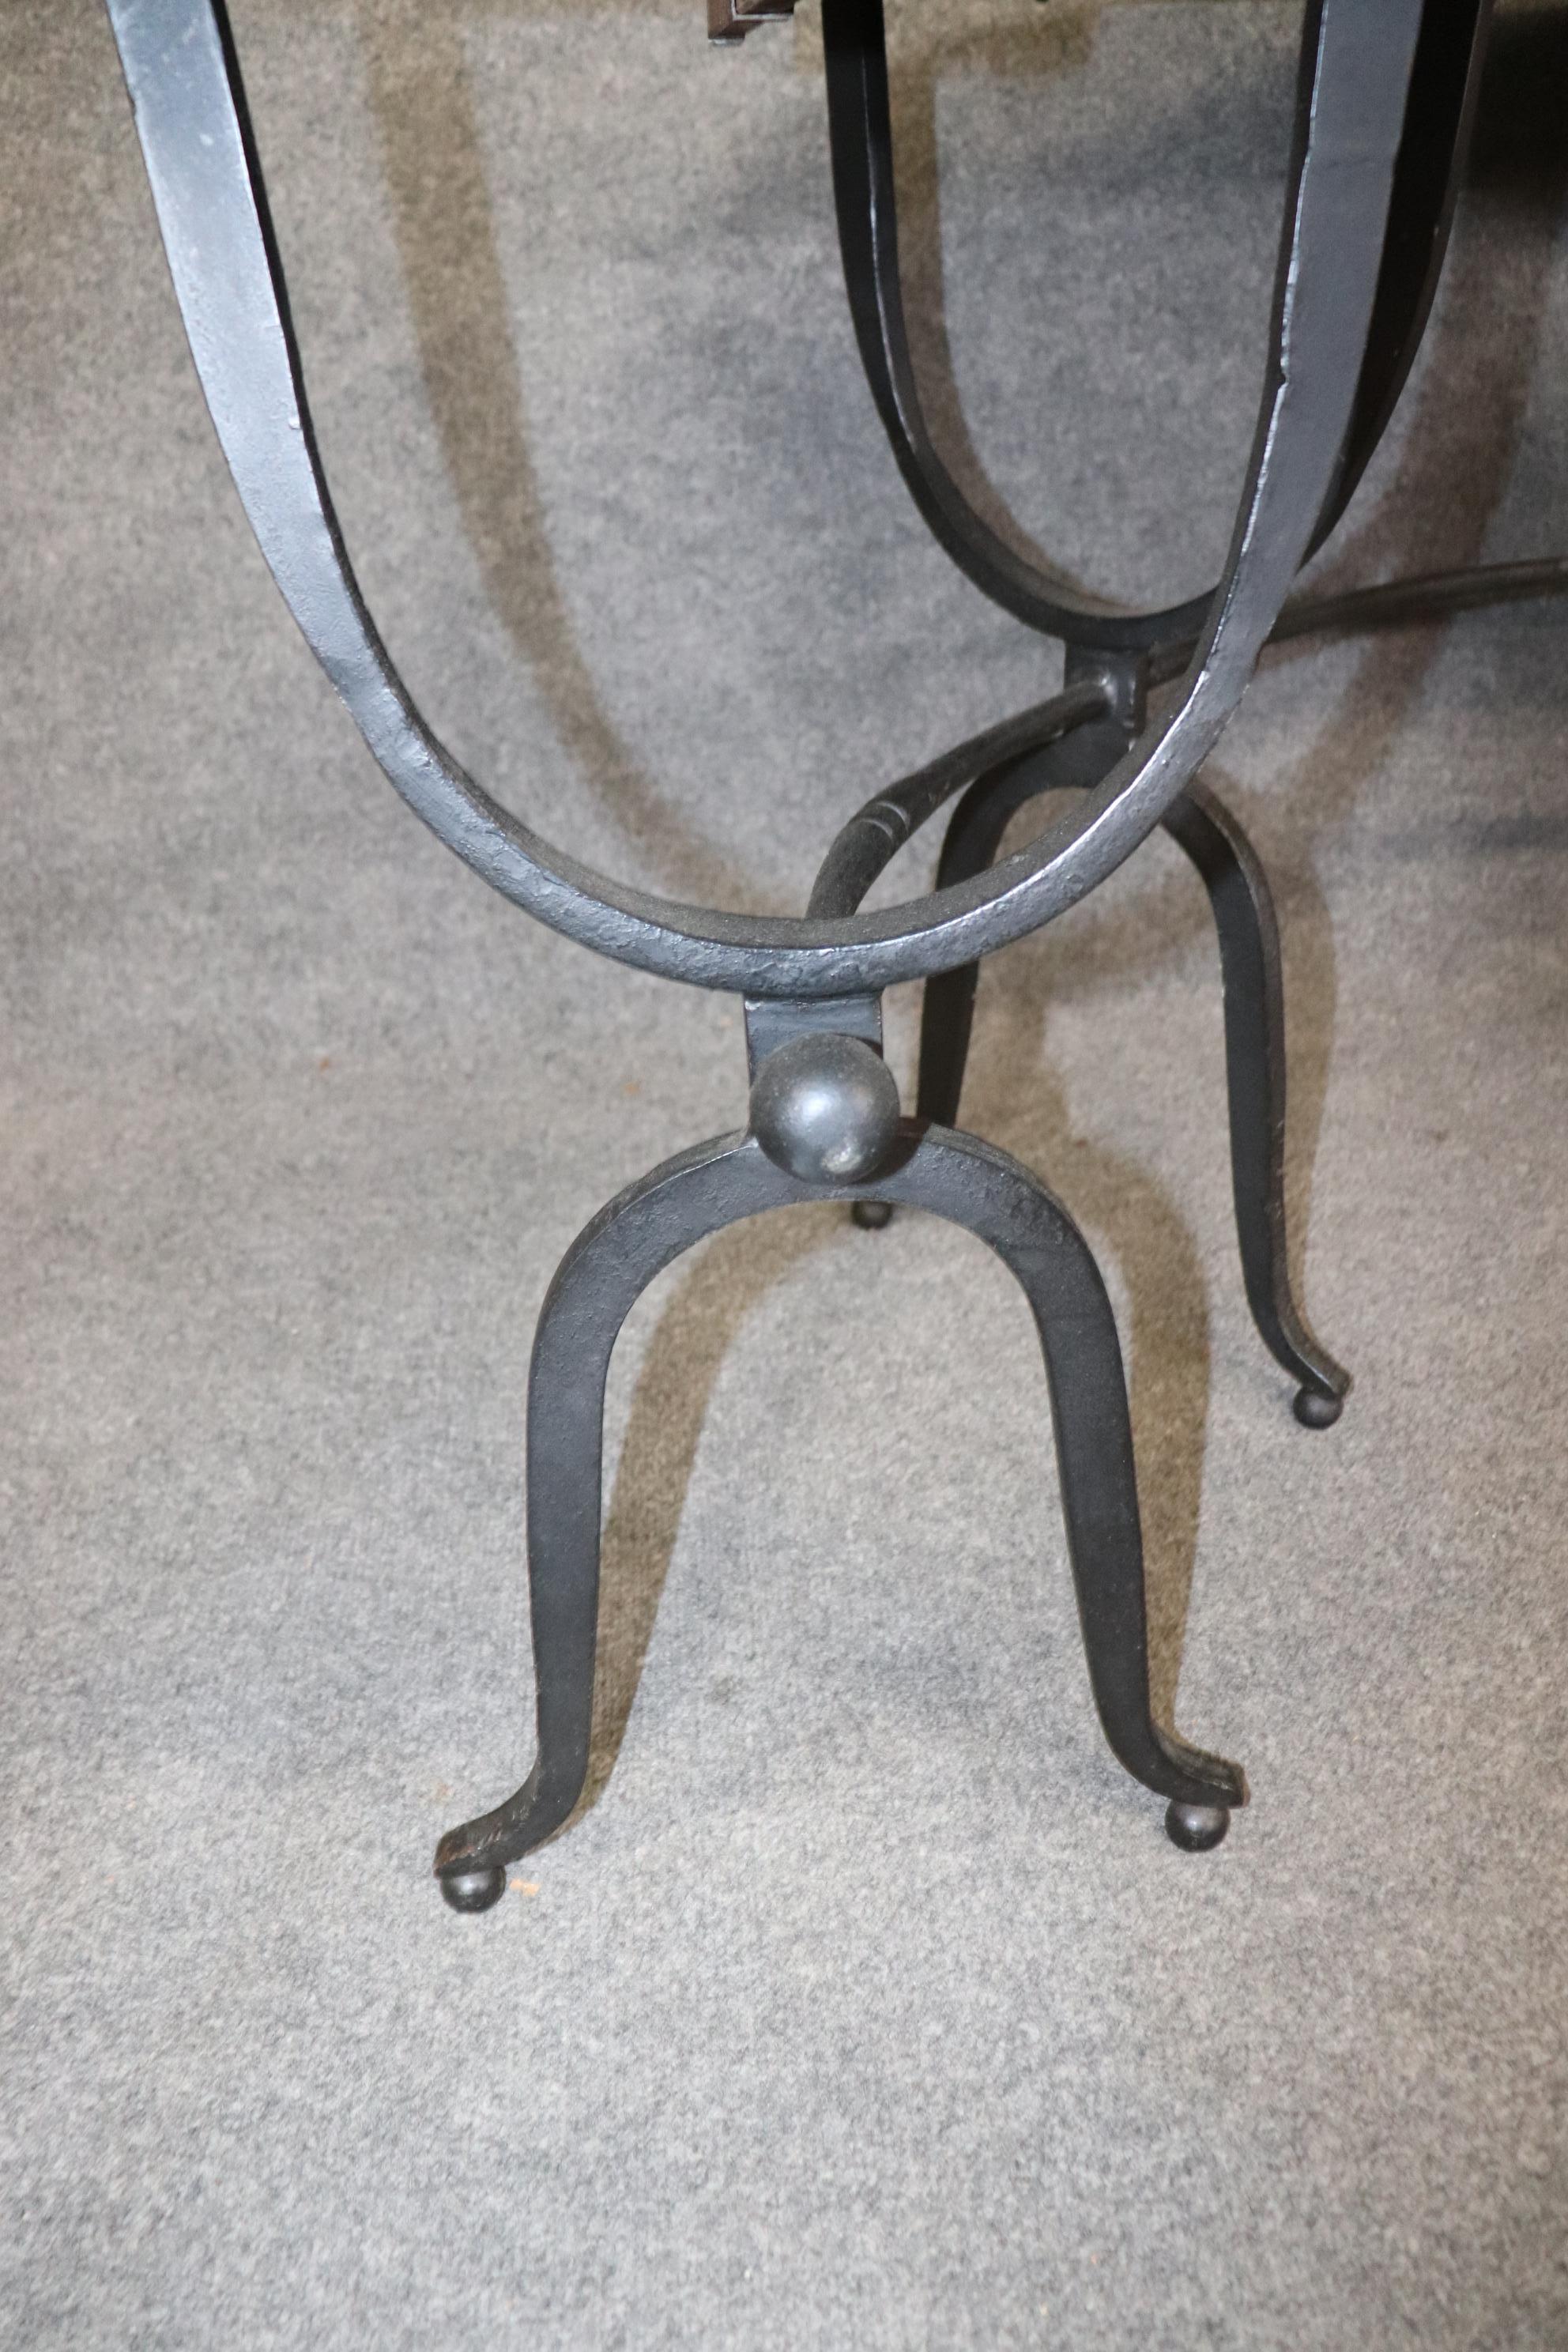 This is a great hand-wrought iron and pine serving table, often used for wine serving and it can also be used as a writing desk. The table measures 28 tall x 62.5 x 45.5 deep when the flaps are up and 33.25 deep when the flaps are down. The piece